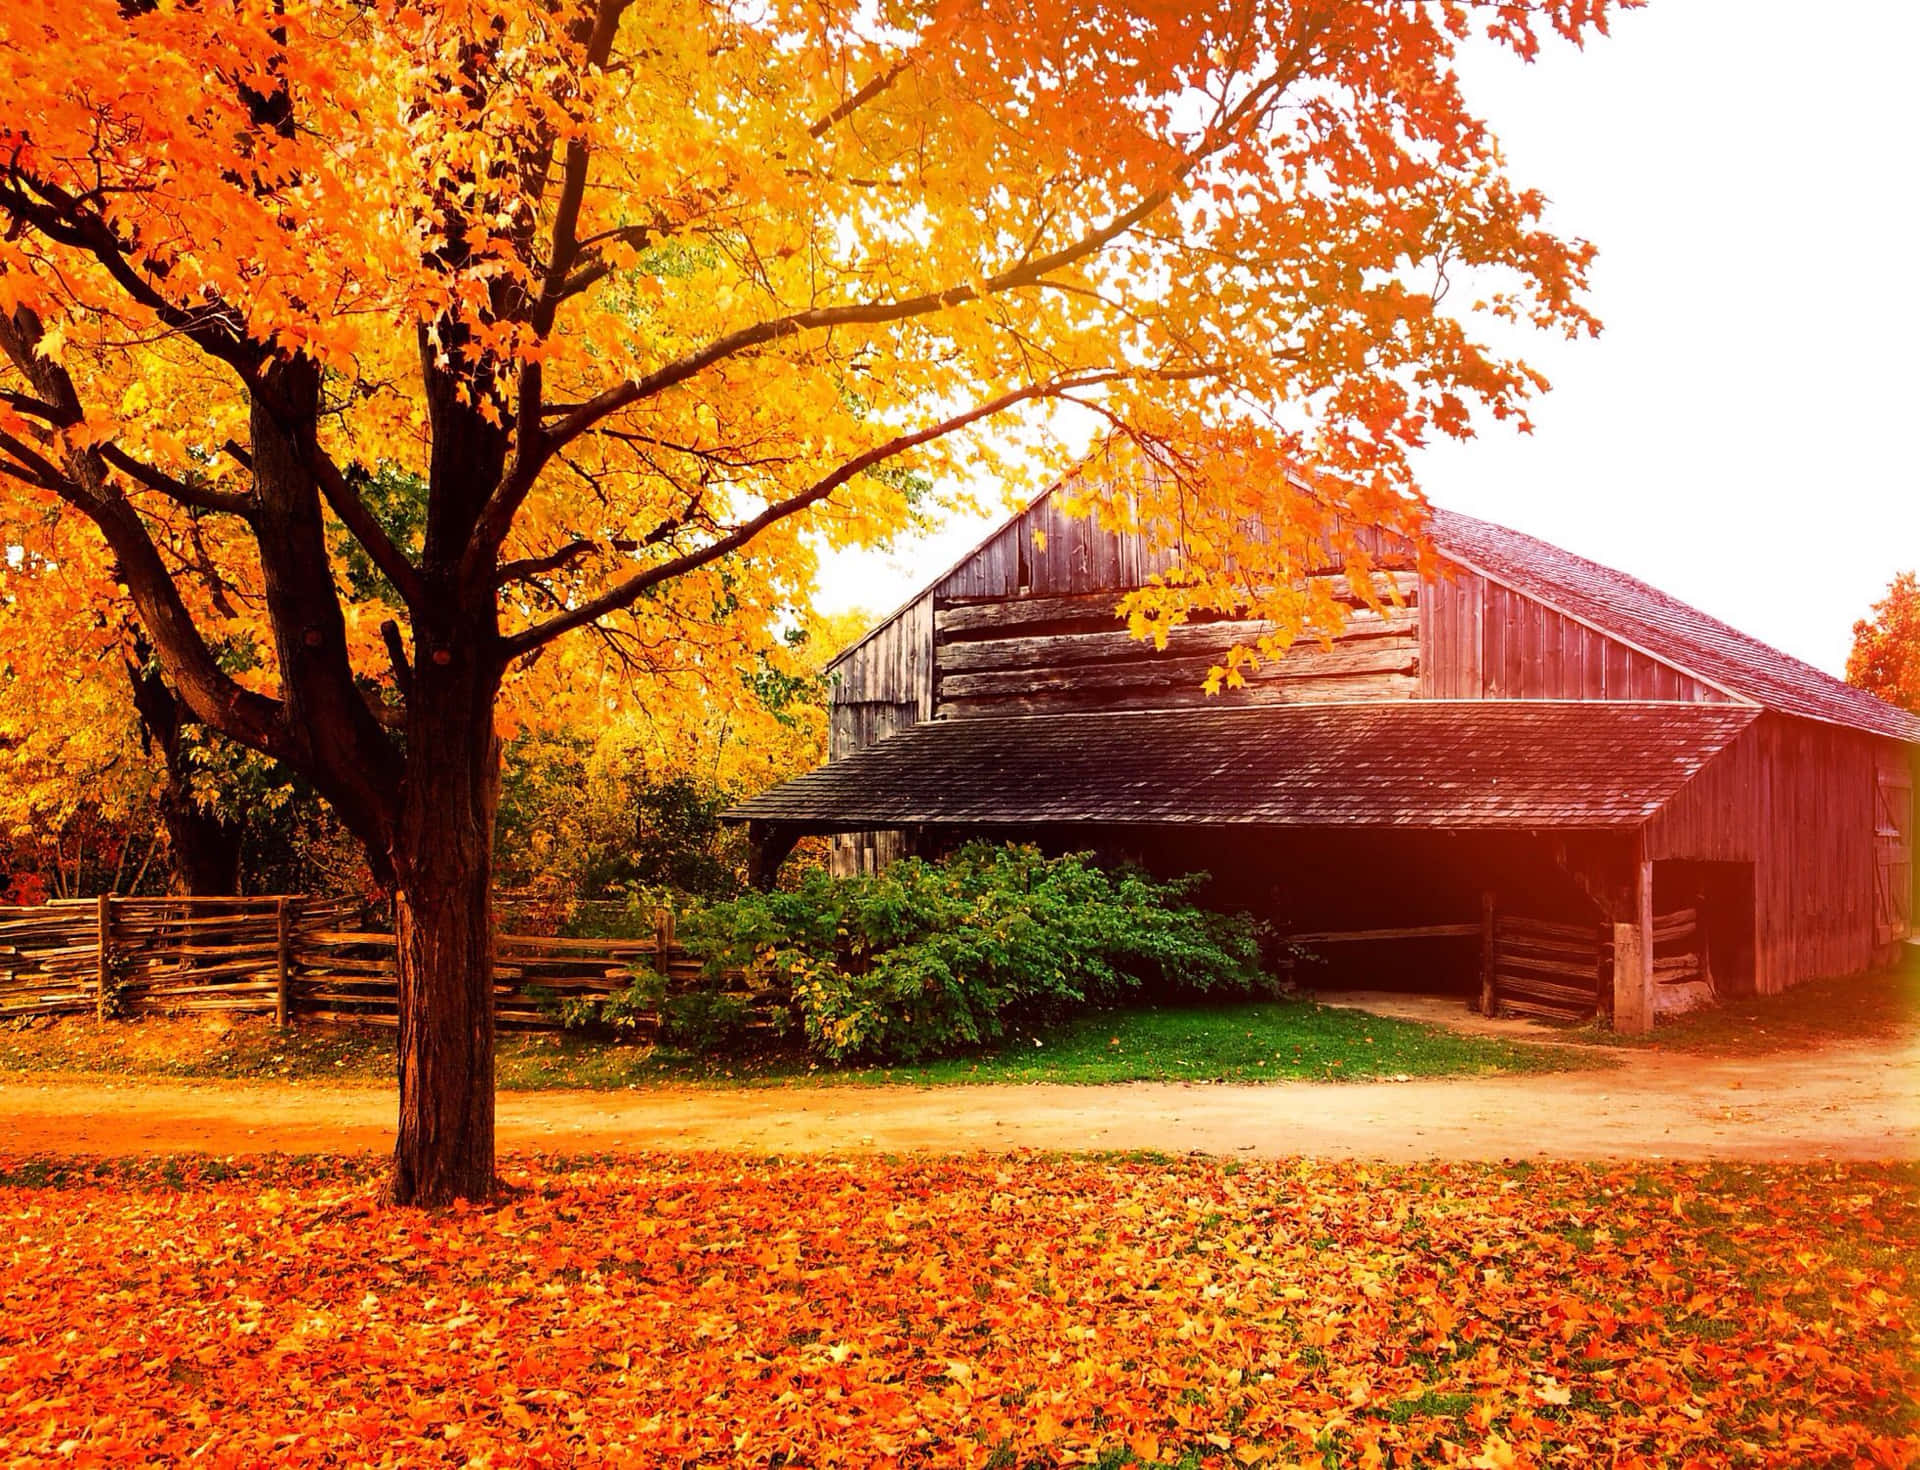 Fall Harvest at a Picturesque Barn Wallpaper